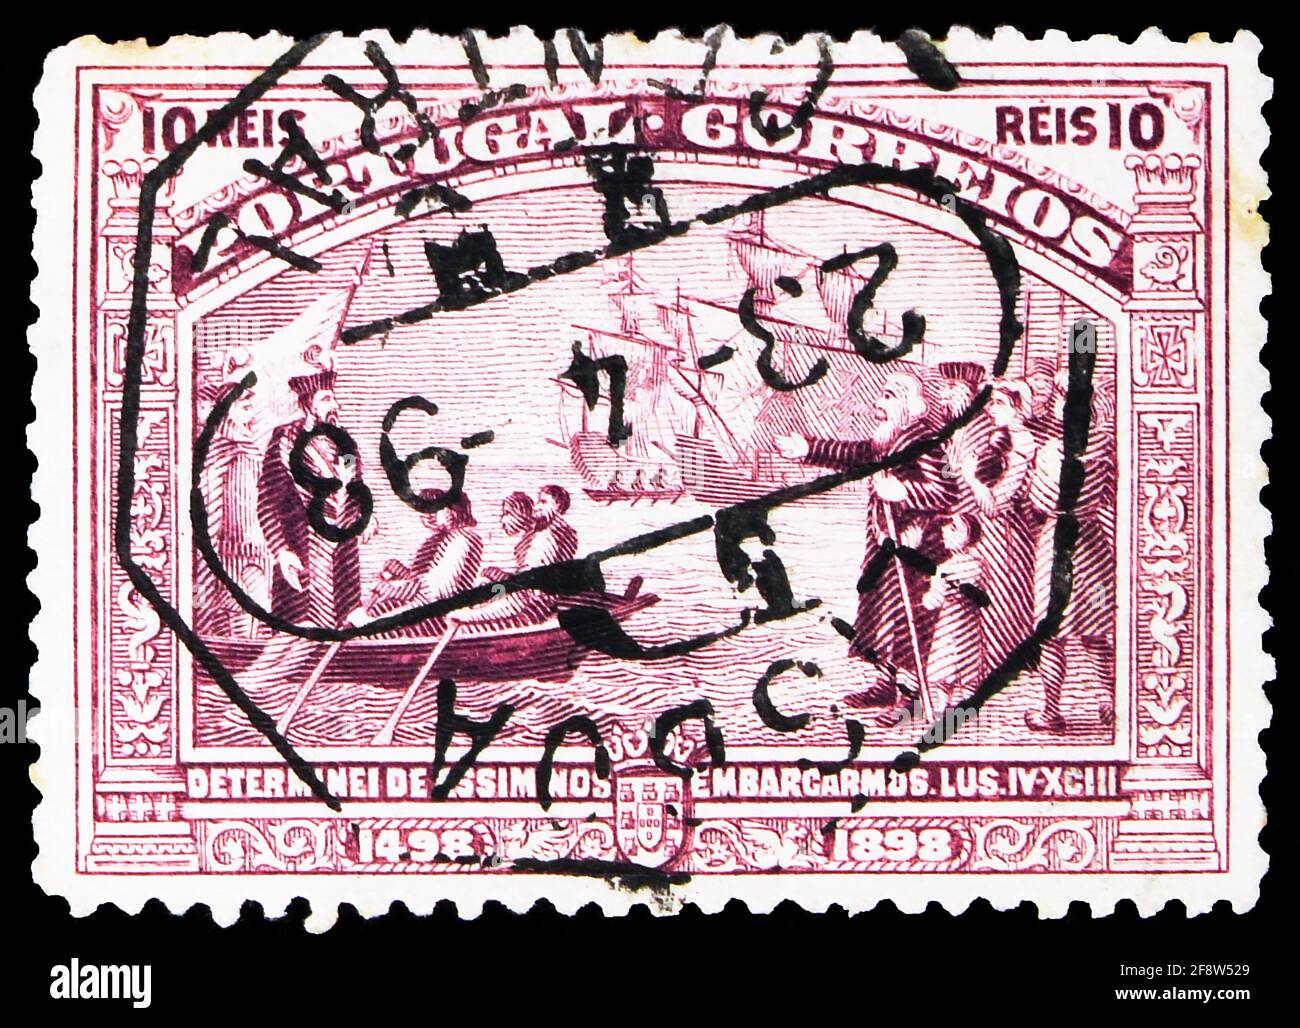 MOSCOW, RUSSIA - OCTOBER 1, 2019: Postage stamp printed in Portugal shows Departure at Belem - 07.07.1497, 400th anniversary of discovering the seaway Stock Photo